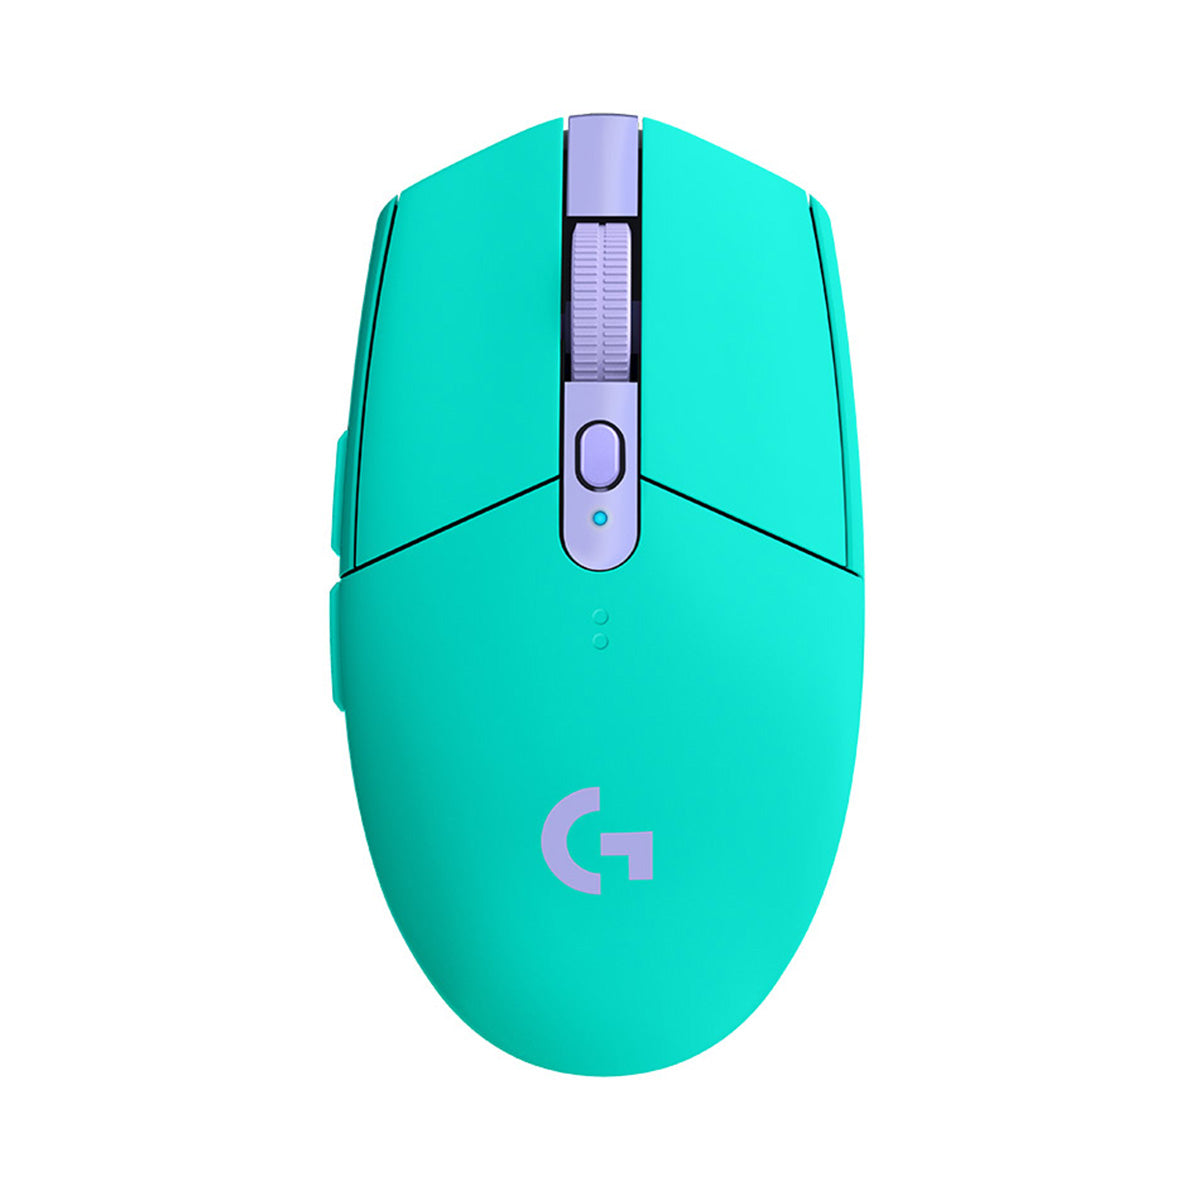 Logitech G203 LIGHTSYNC Gaming Mouse - Blue – Ghostly Engines